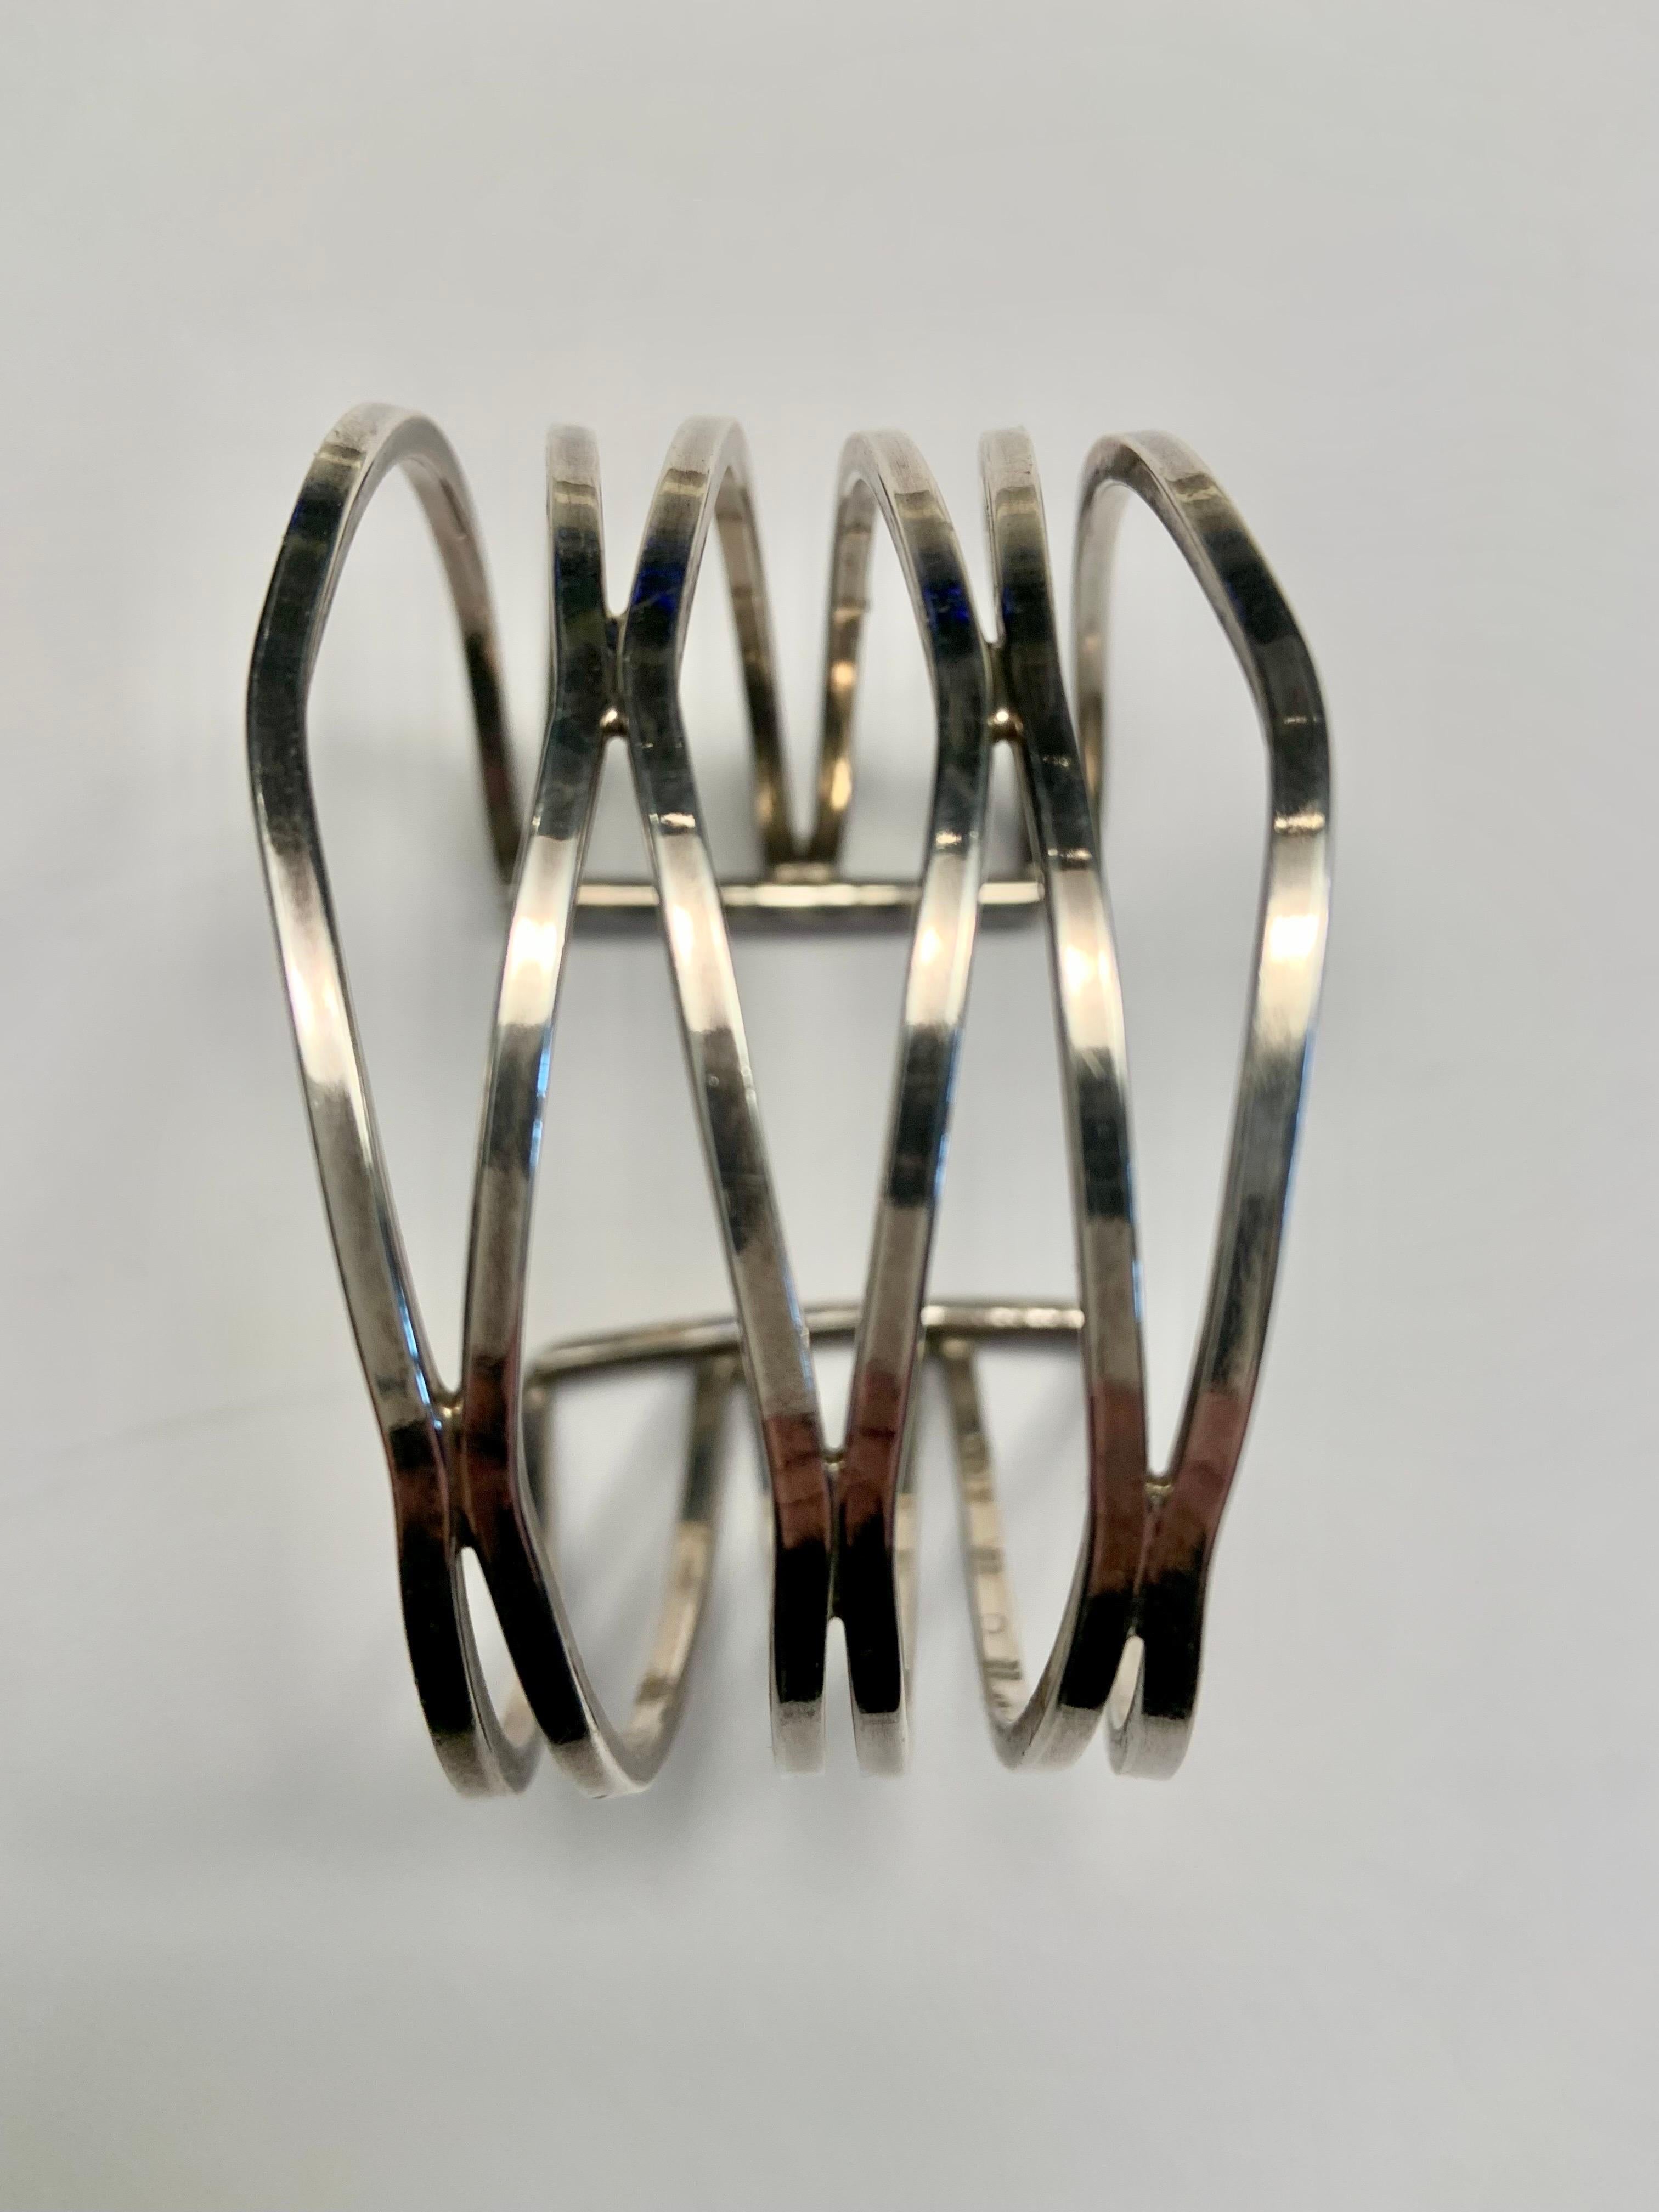 This is a very chic sterling silver cuff, composed of three pairs of silver bands undulating from one side of the wrist to another, like a wave.  It is marked 925 on the inside but it is not signed. The bracelet is in excellent